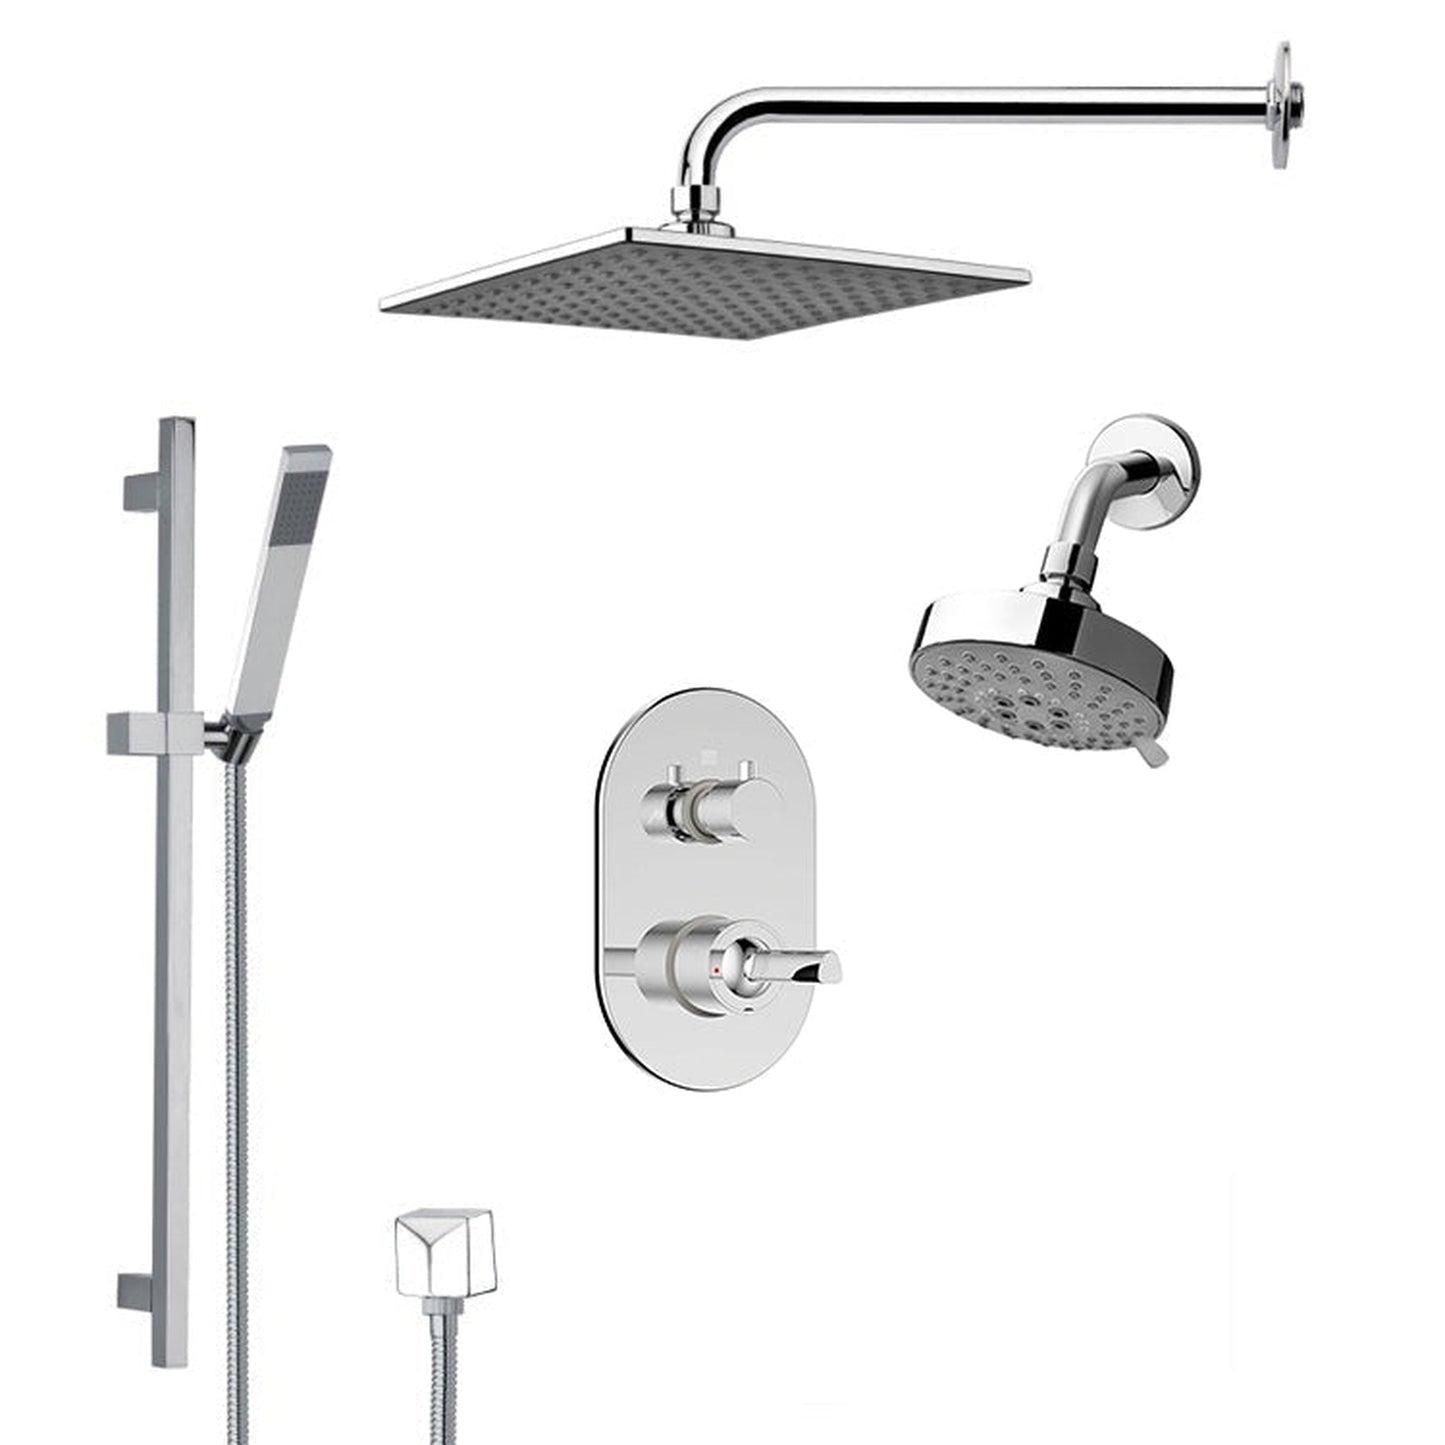 FontanaShowers Deluxe Designers 10" Chrome Wall-Mounted Square & Small Round Dual Shower Head Rainfall Shower System With Slide Bar and Hand Shower